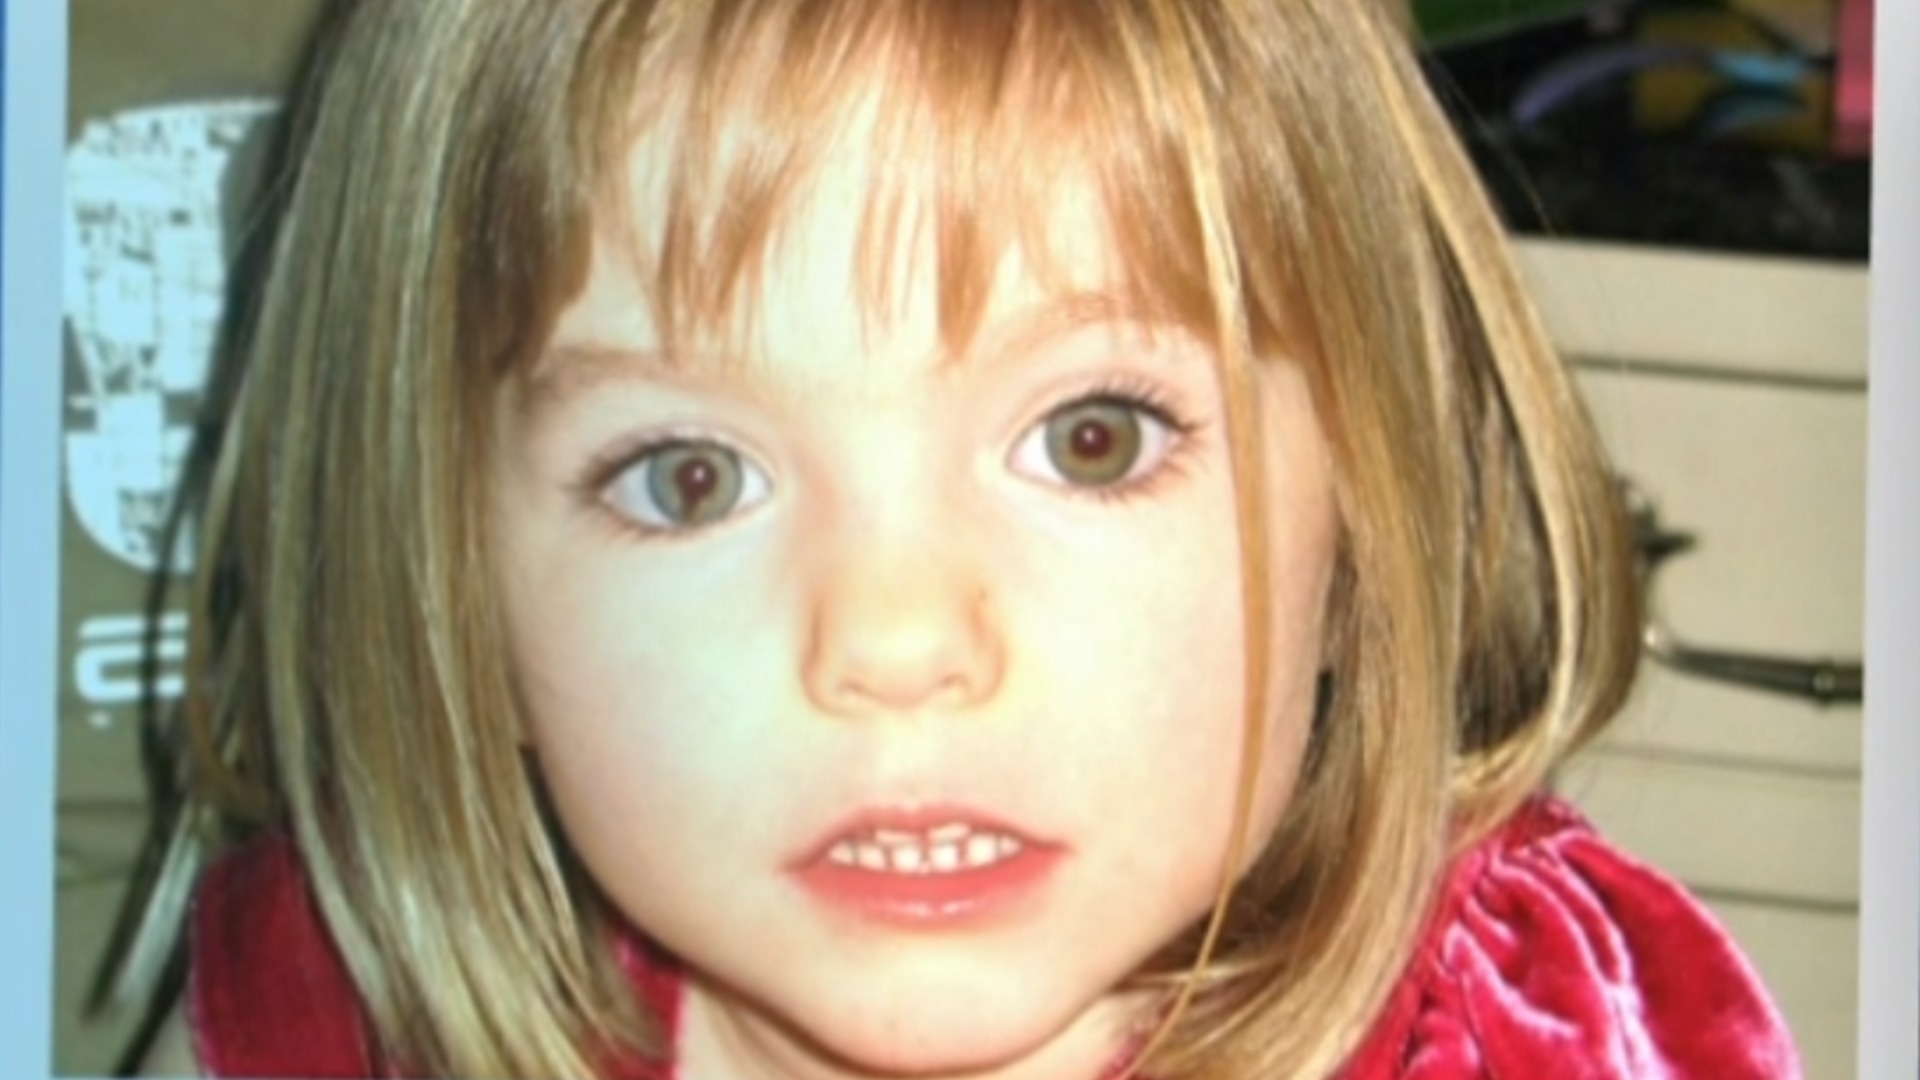 13 years after Madeleine McCann’s disappearance, investigators believe they have a reliable suspect